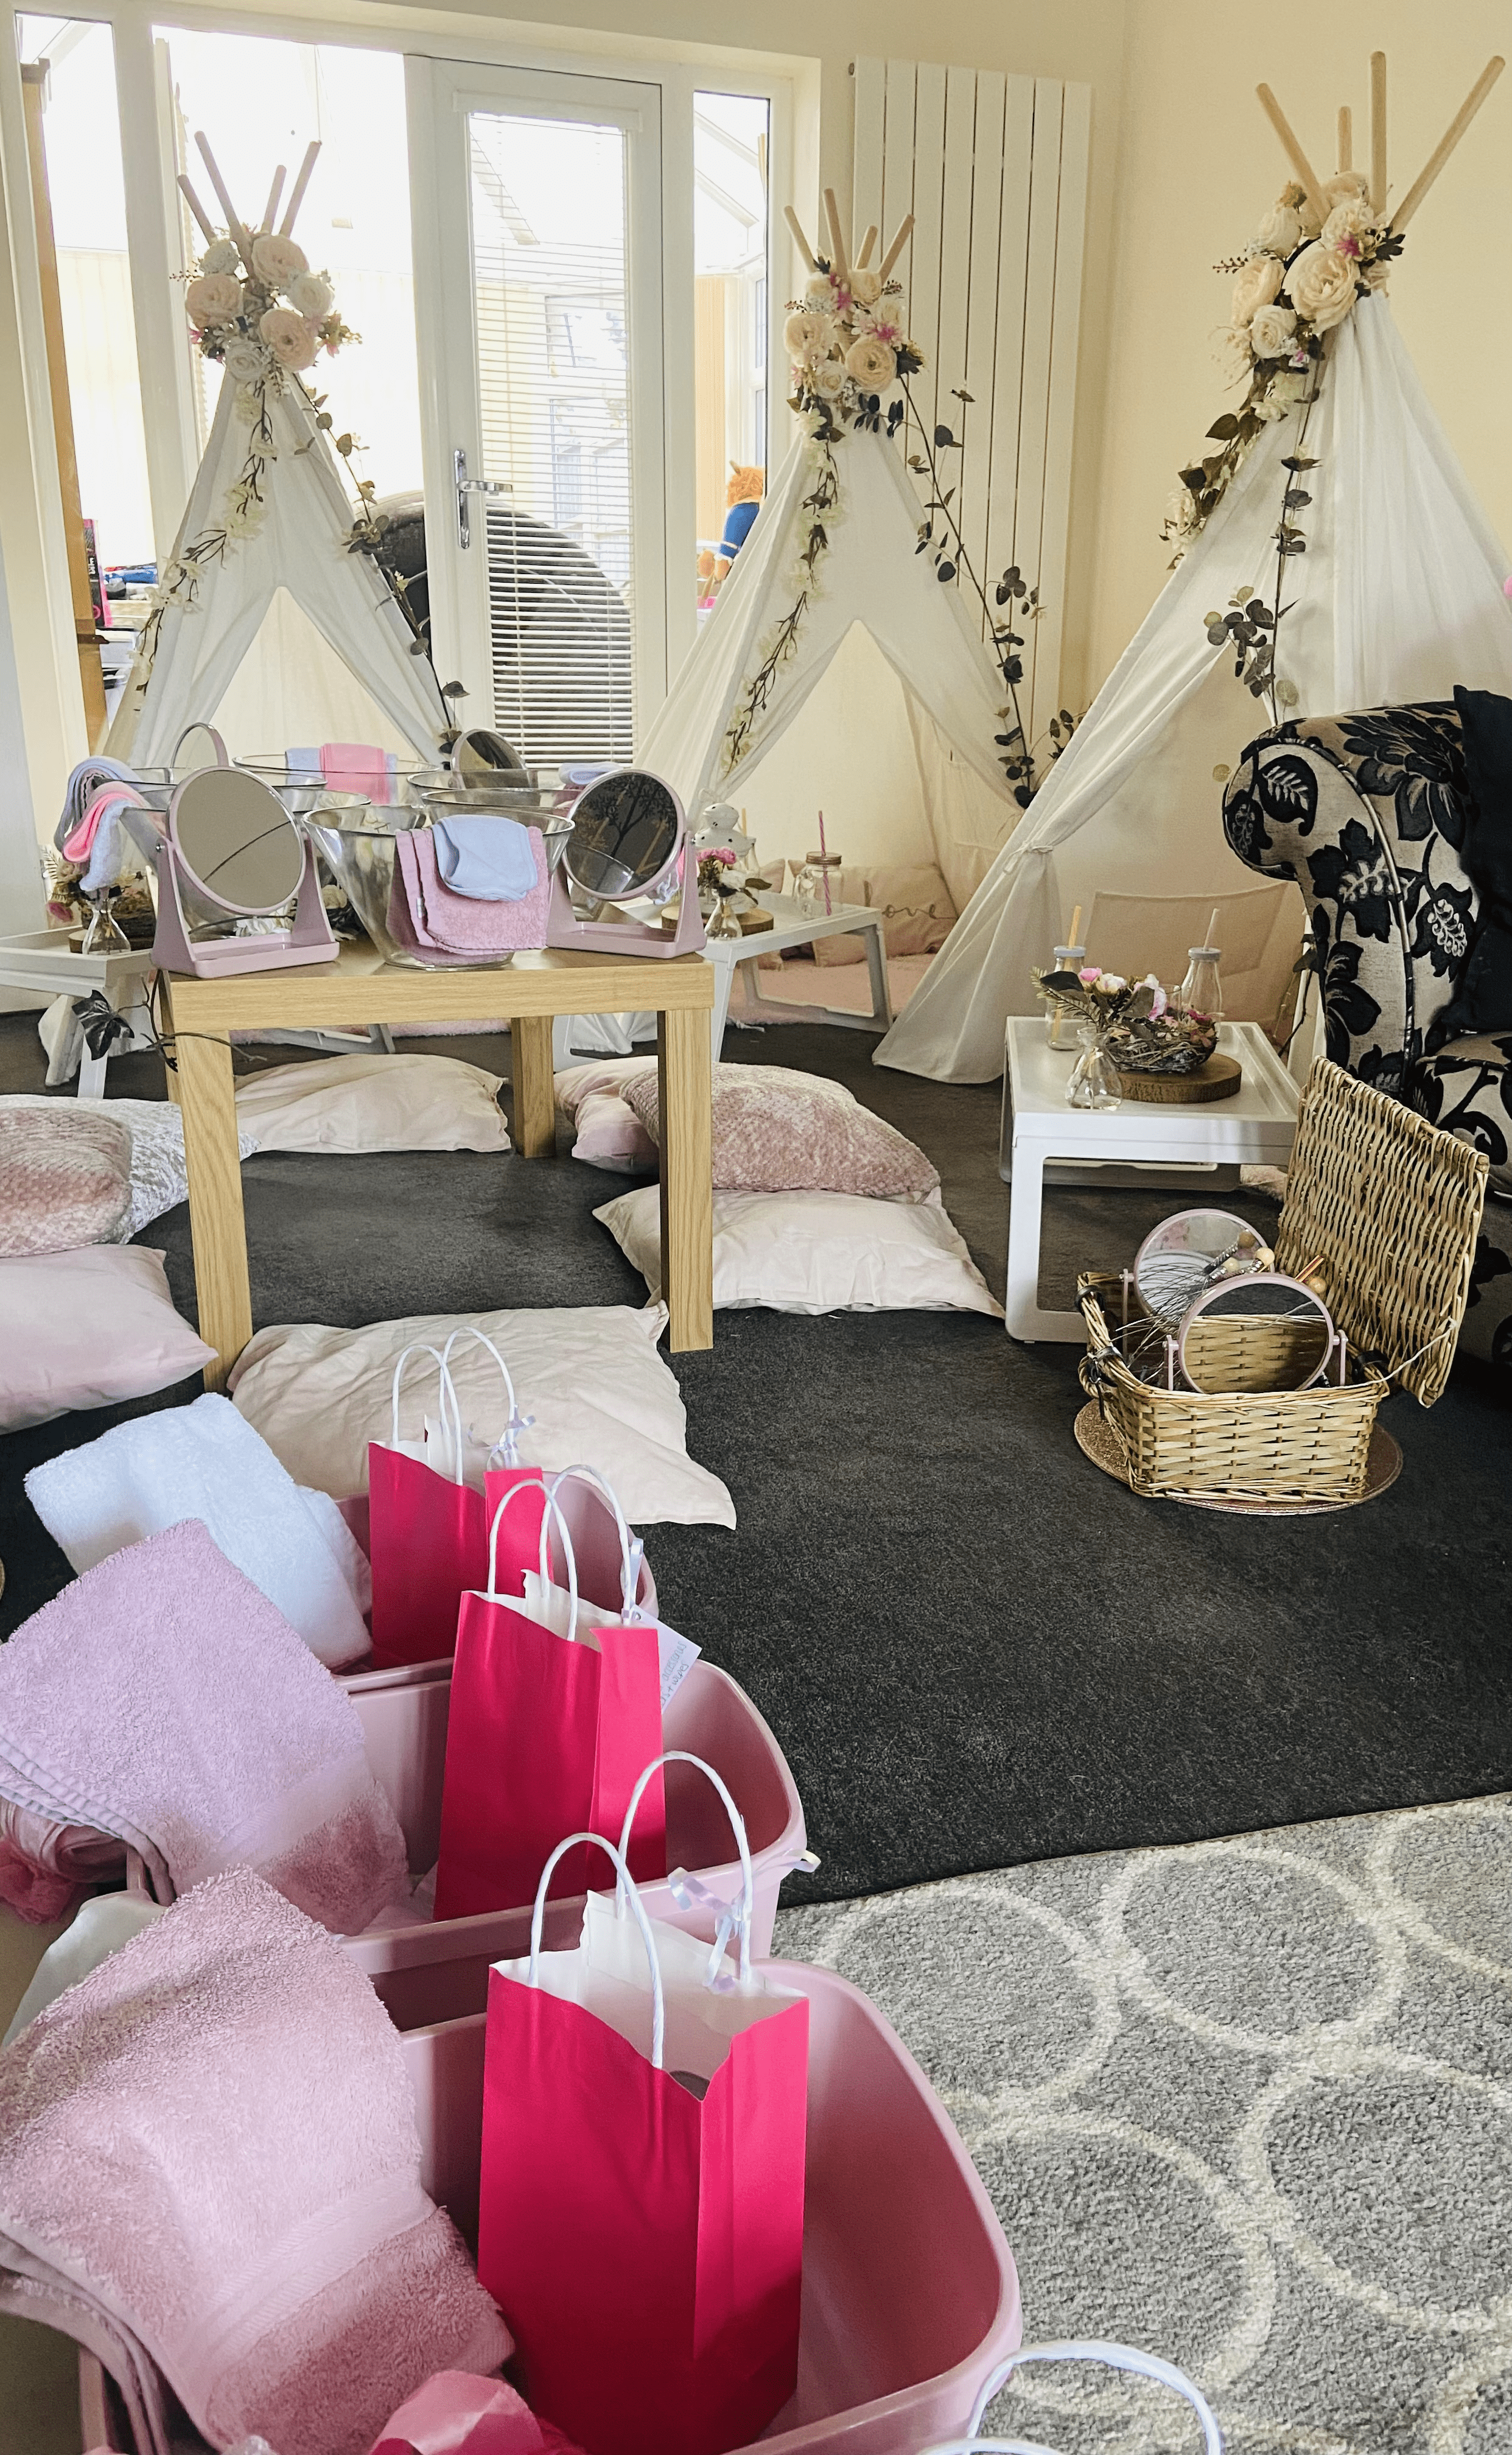 Teepees, Treats and Events- Sleepover Party Tents in West Midlands